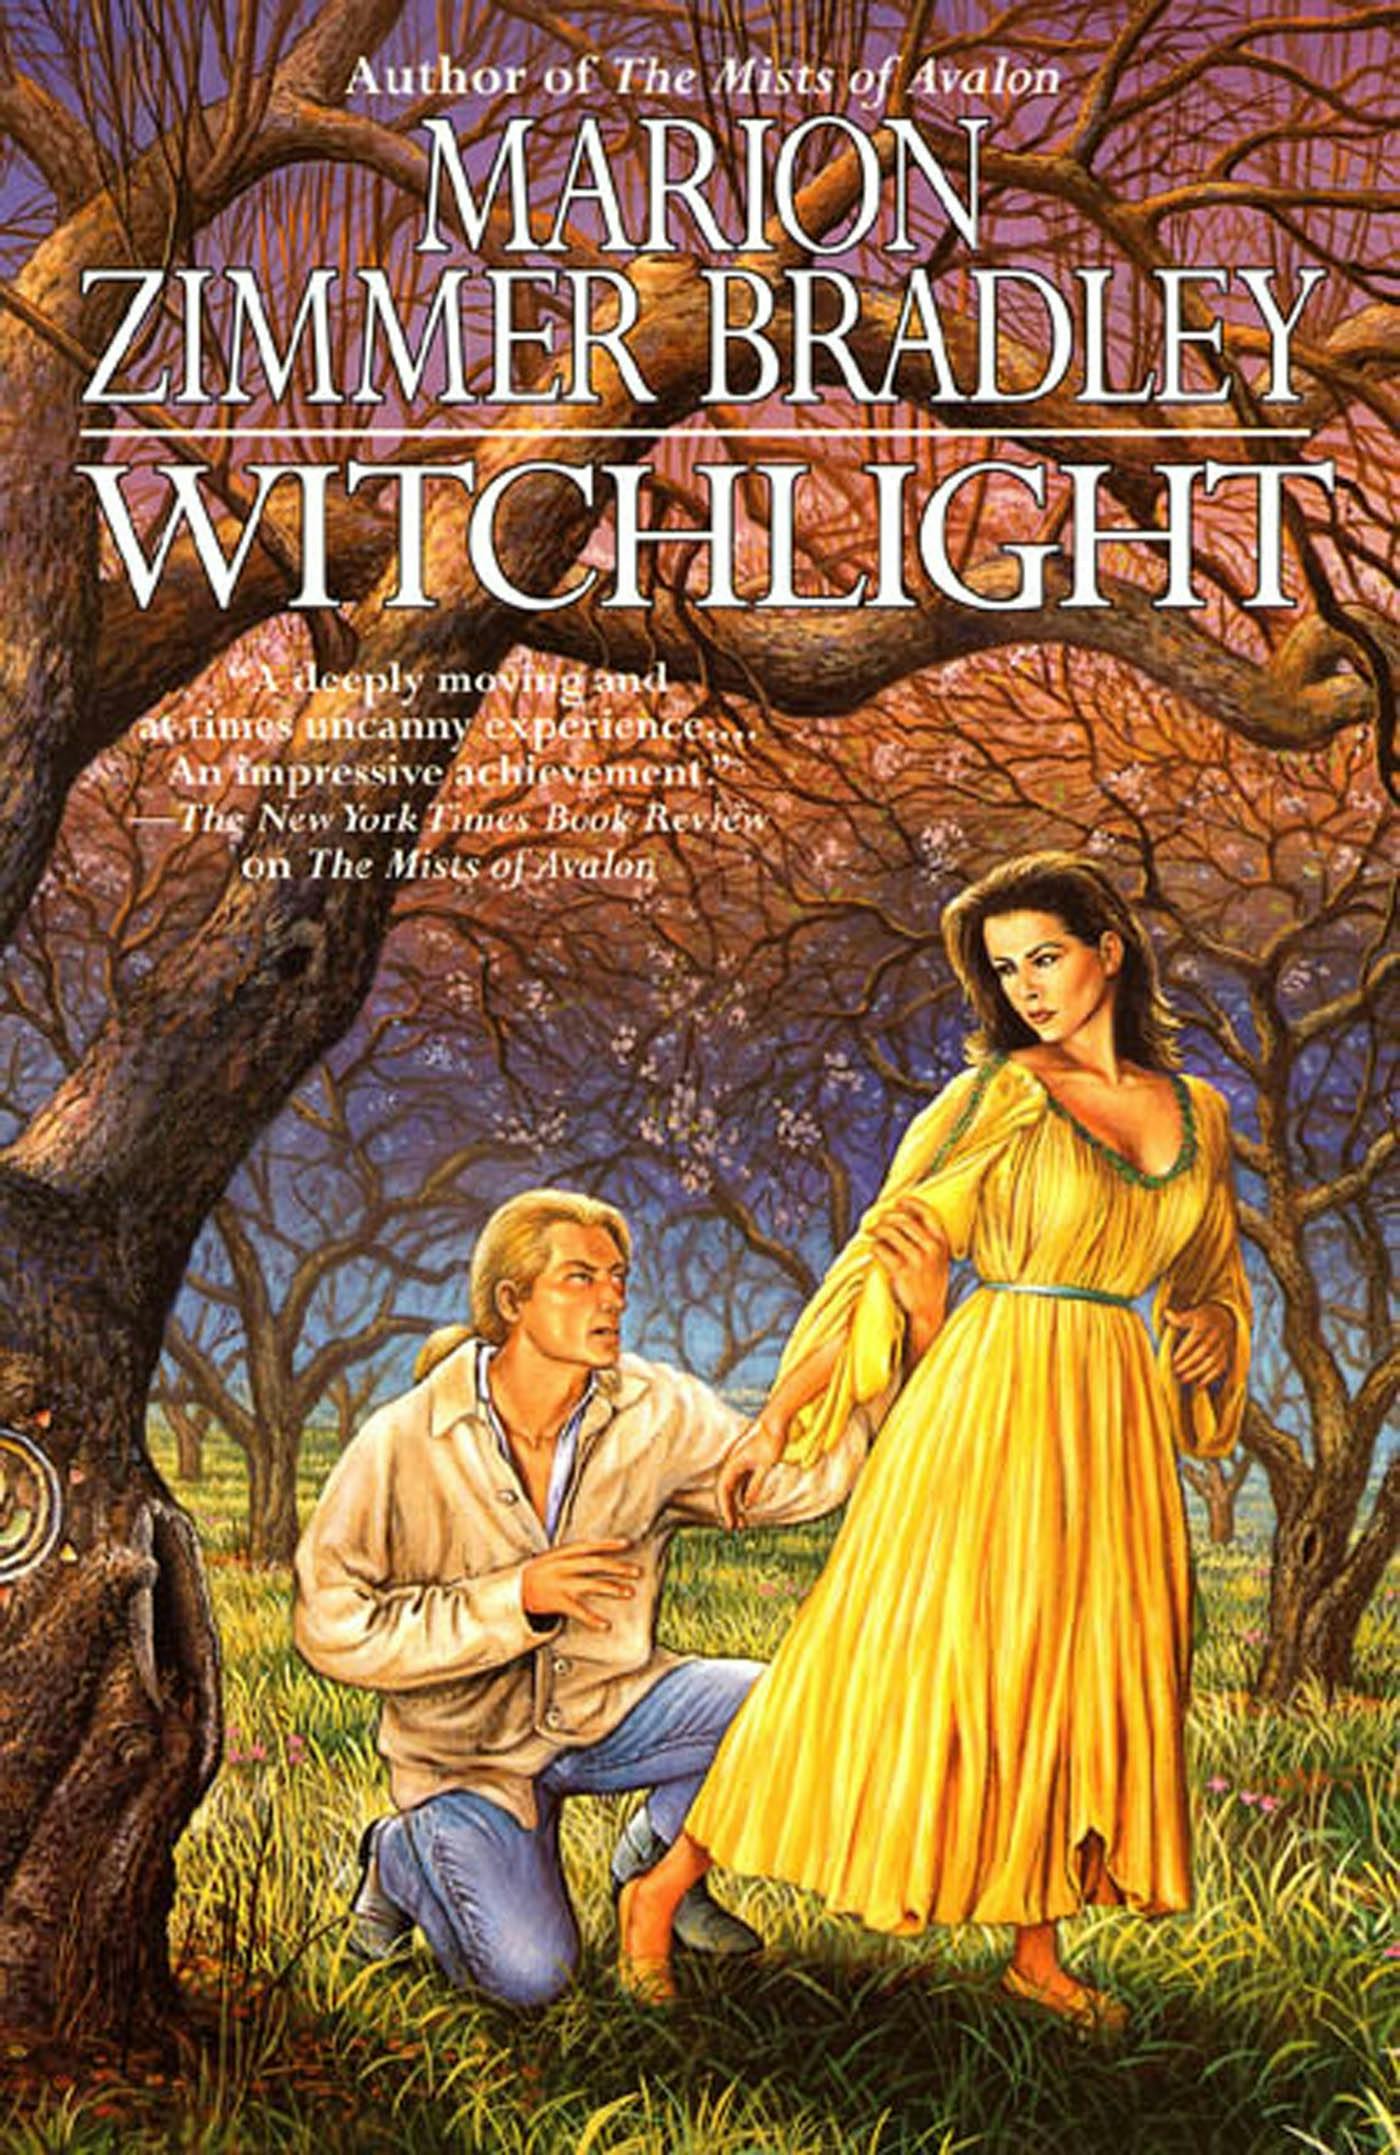 Cover for the book titled as: Witchlight